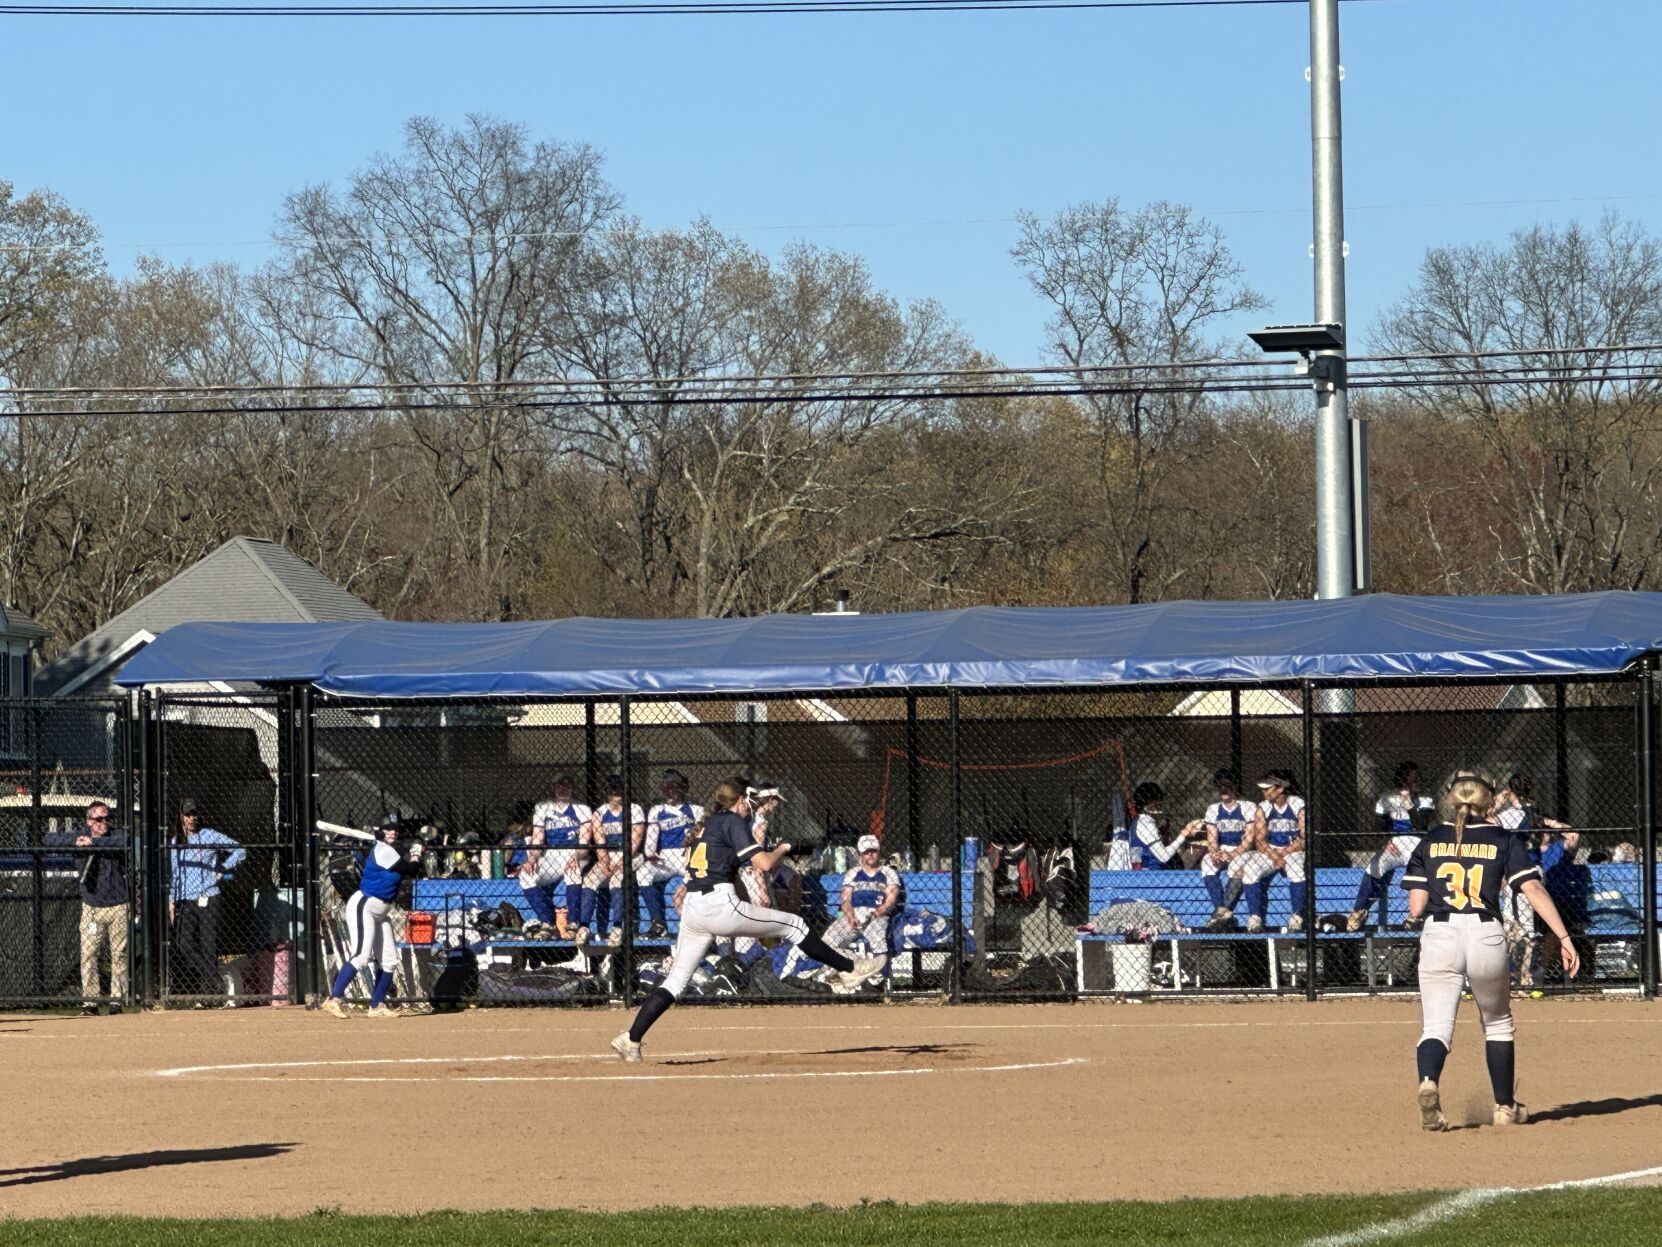 Southington Knights Defeat RHAM Raptors 15-5 in a Dominating Game of Strong Hitting Performances